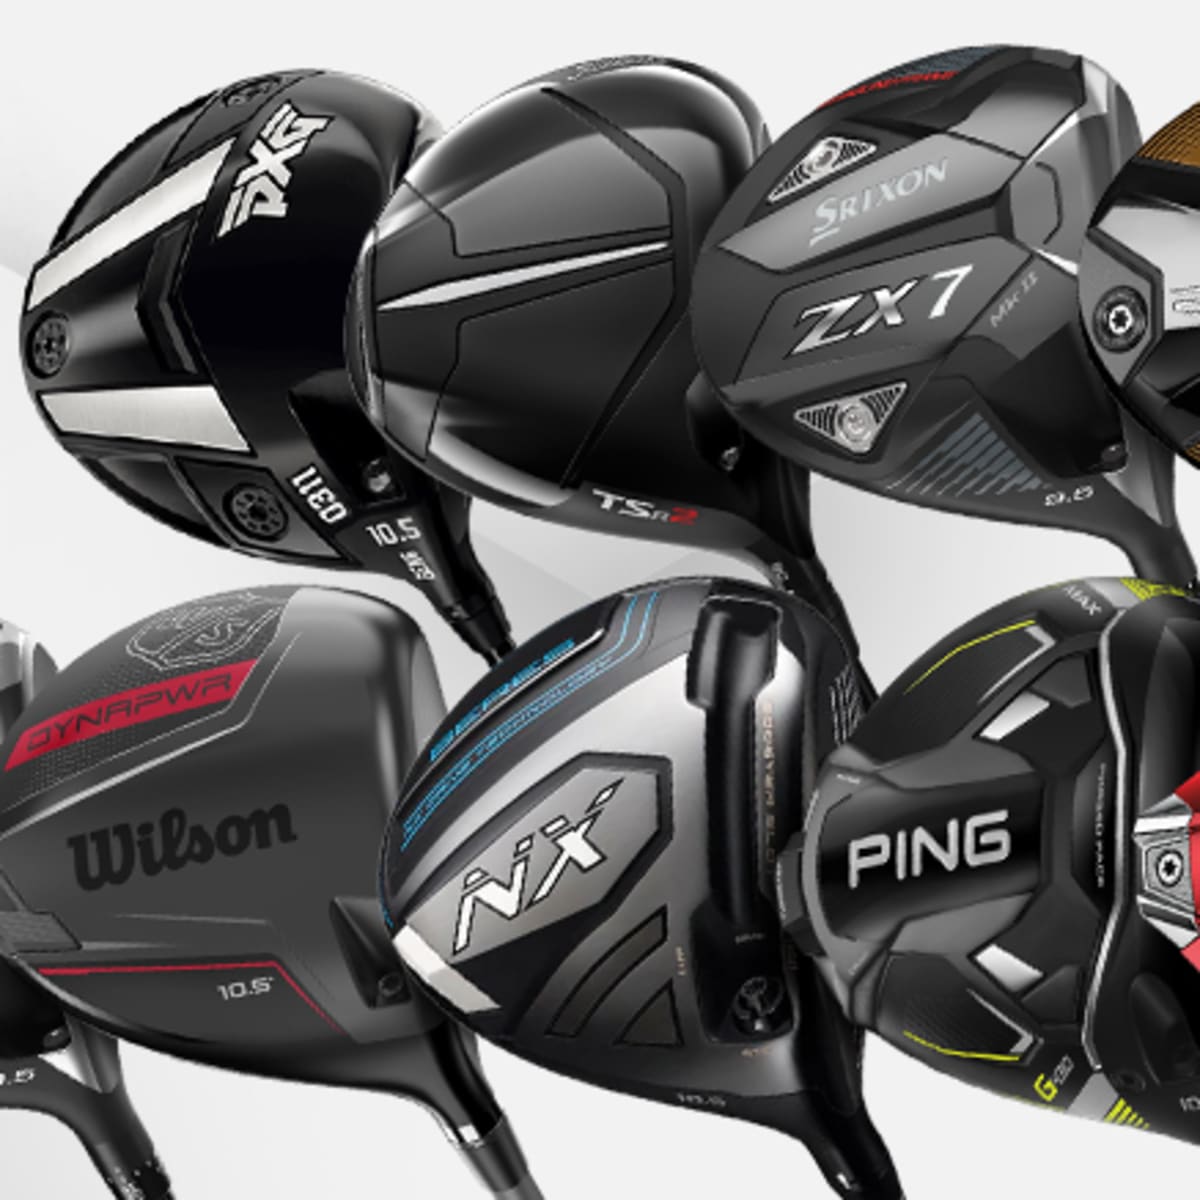 An important factor in buying new irons that most golfers overlook, Golf  Equipment: Clubs, Balls, Bags